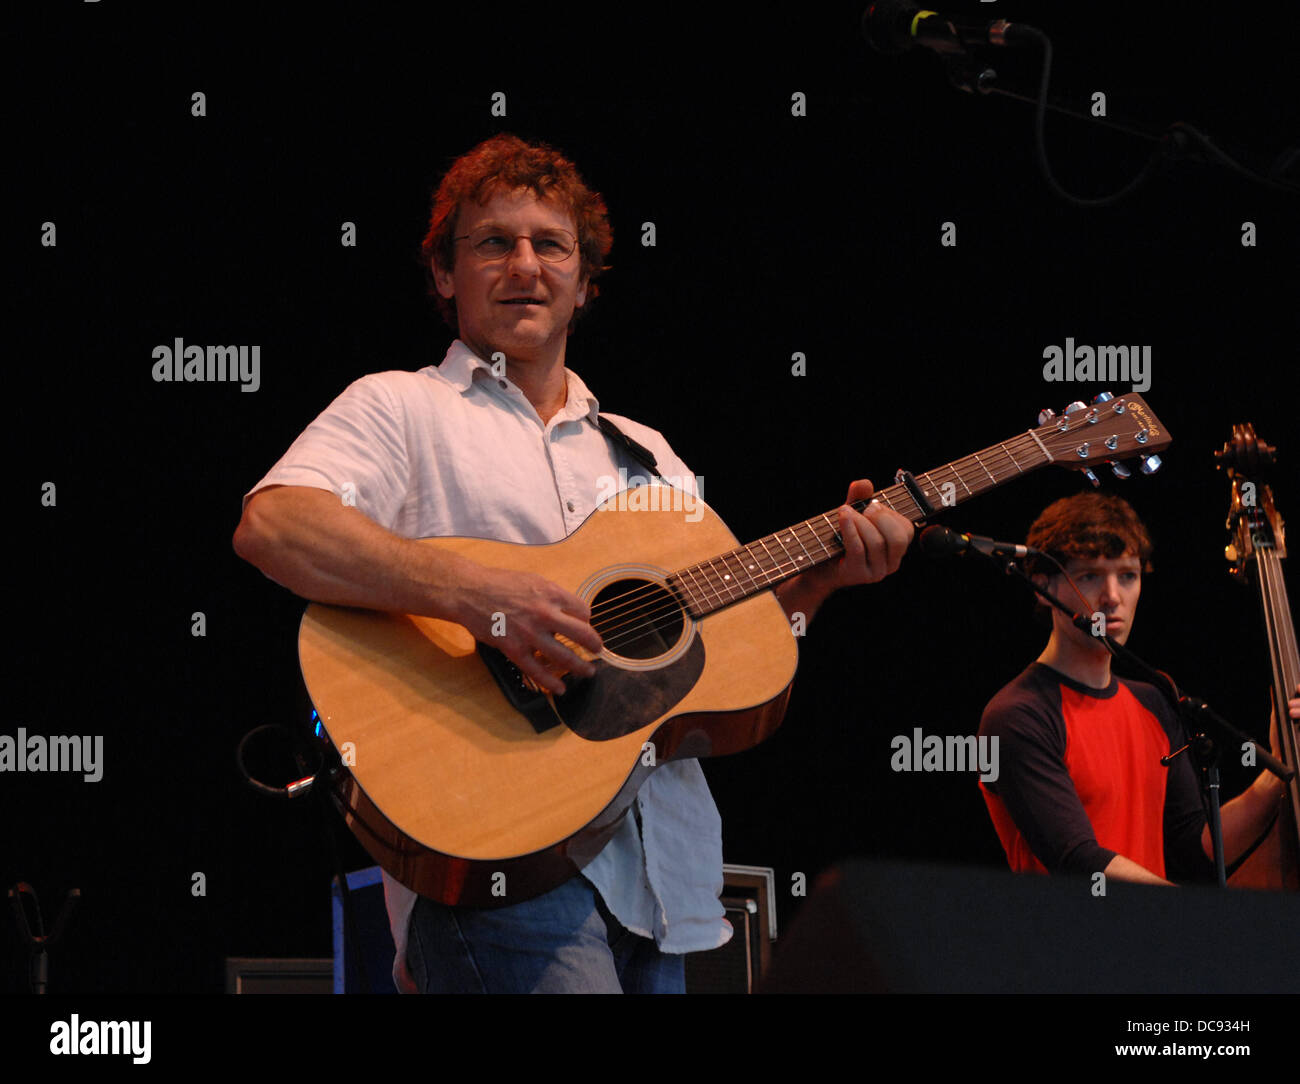 Portsmouth, Virginia, USA. 11th Aug, 2013. Singer TODD SHEAFFER of American newgrass, jamband 'Railroad Earth' performs during the 'Noise Of The Earth Tour' at The Ntelos Pavilion. (Credit Image: Credit:  Jeff Moore/ZUMA Wire/Alamy Live News) Stock Photo